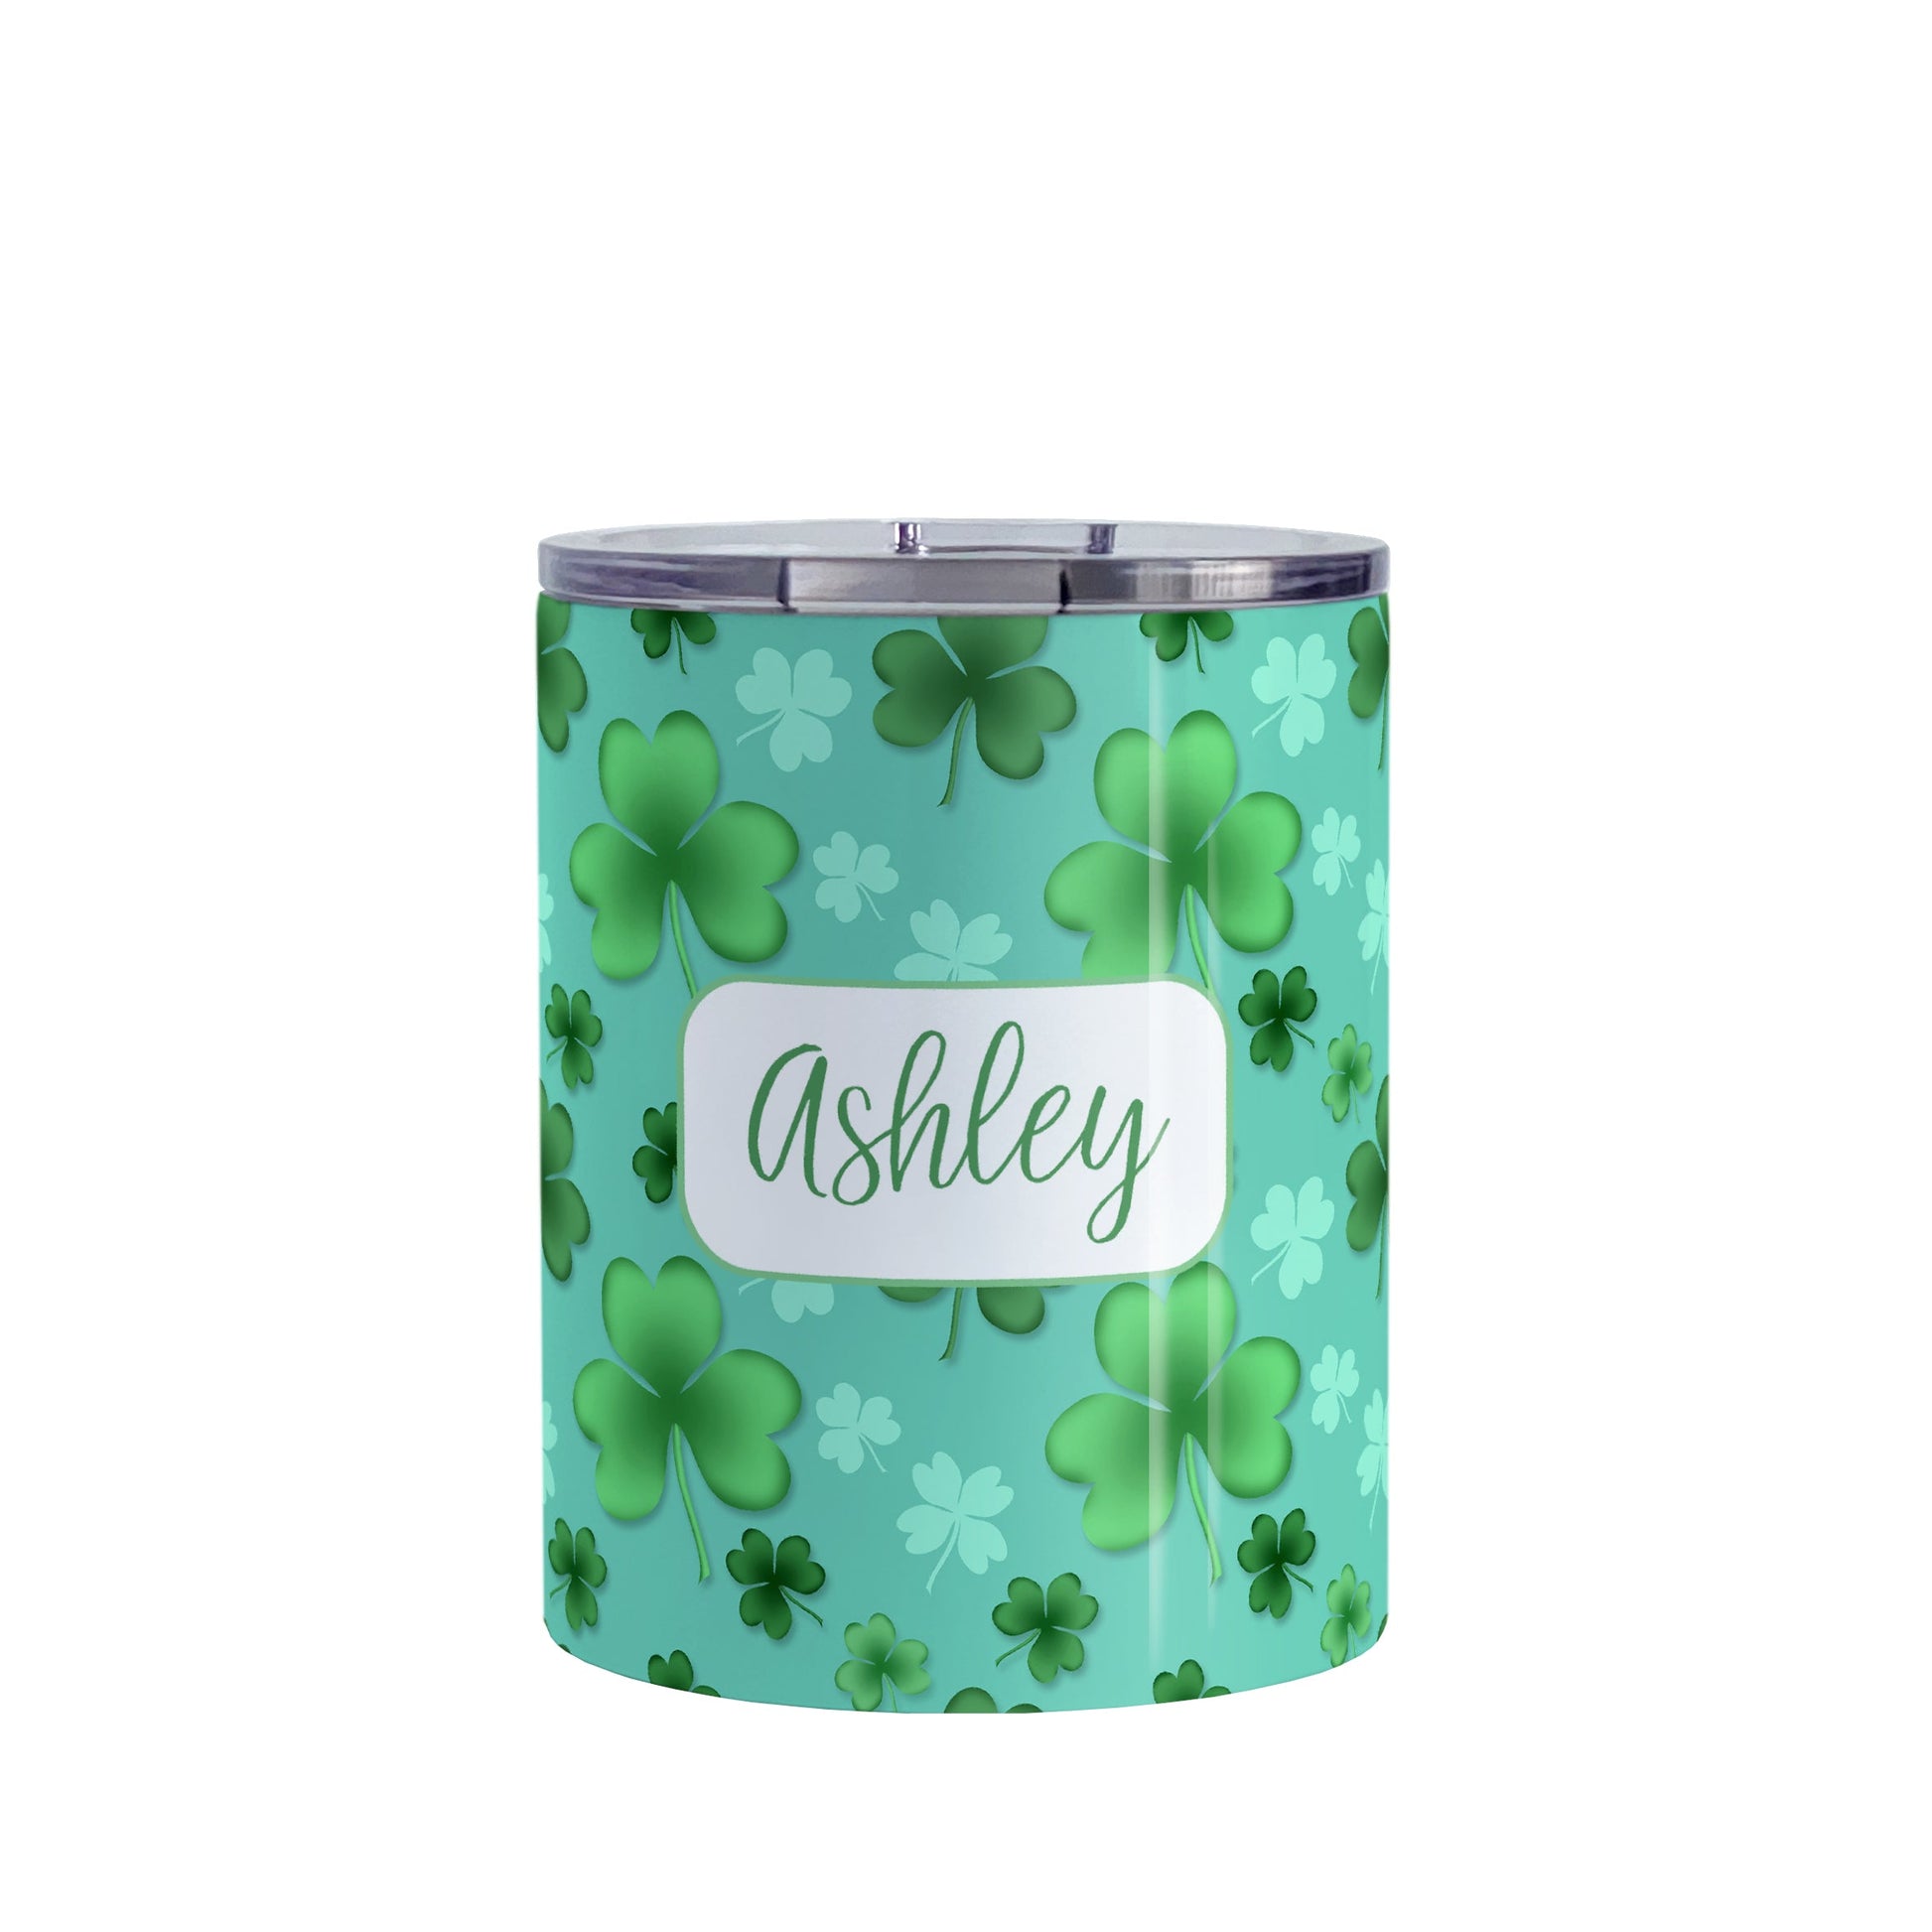 Personalized Lucky Clover Pattern Teal and Green Tumbler Cup (10oz, stainless steel insulated) at Amy's Coffee Mugs. A tumbler cup designed with a lucky green clover pattern with a 4-leaf clover among 3-leaf clovers, in different shades of green, over a teal background that wraps around the cup. Your name is personalized in green on white, over the lucky clover pattern.